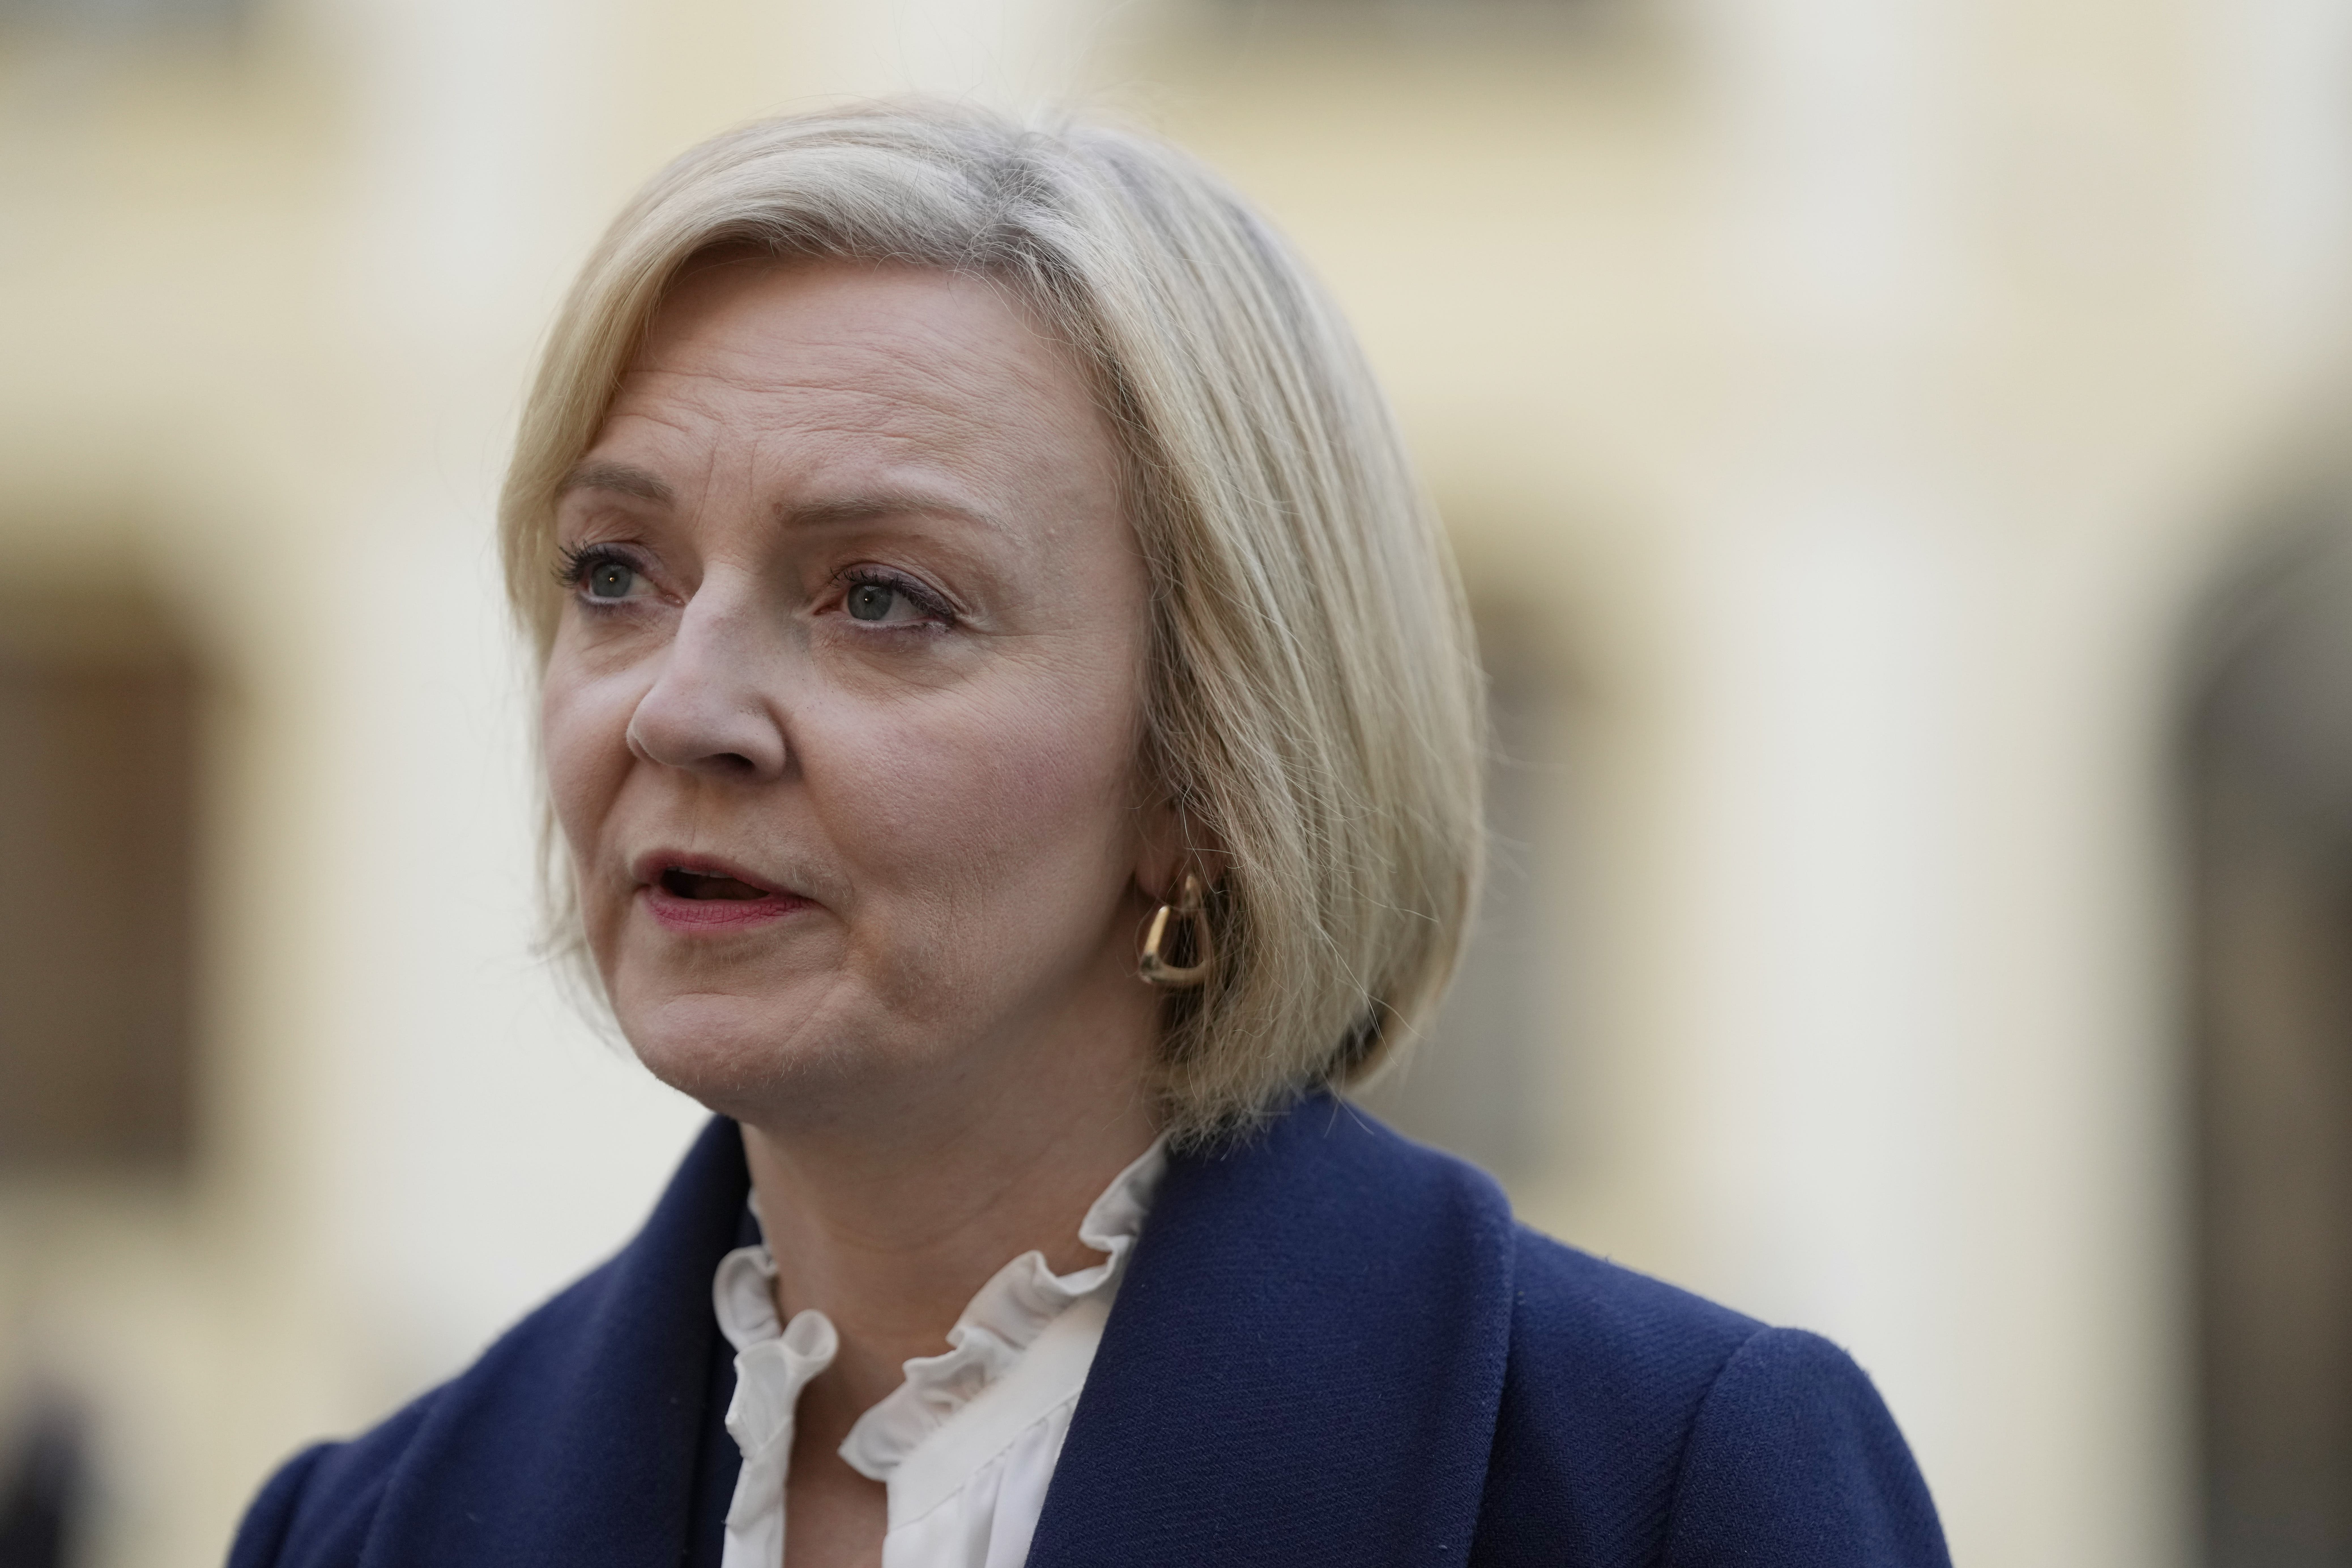 Former prime minister Liz Truss has also raised concerns about China’s influence